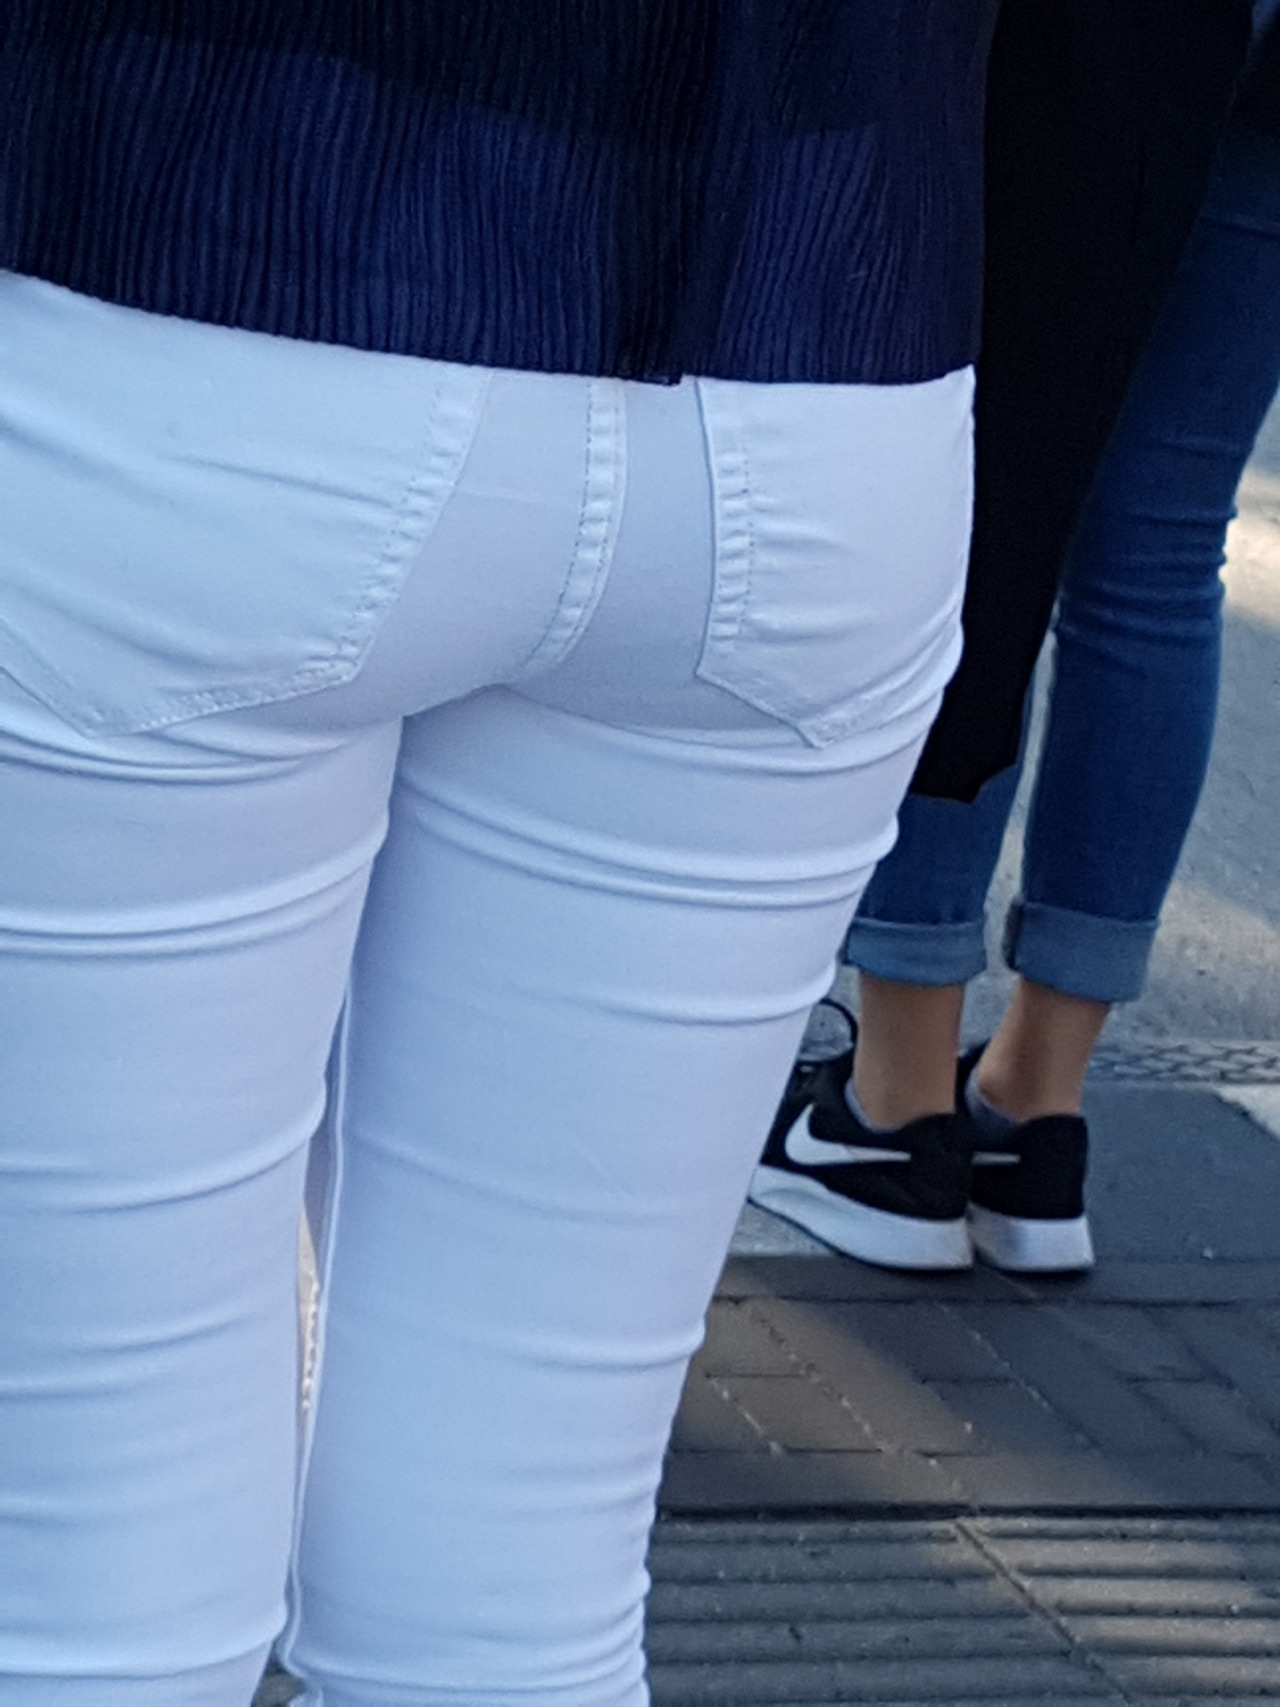 Sexy Girls Bending Over In Tight Jeans 